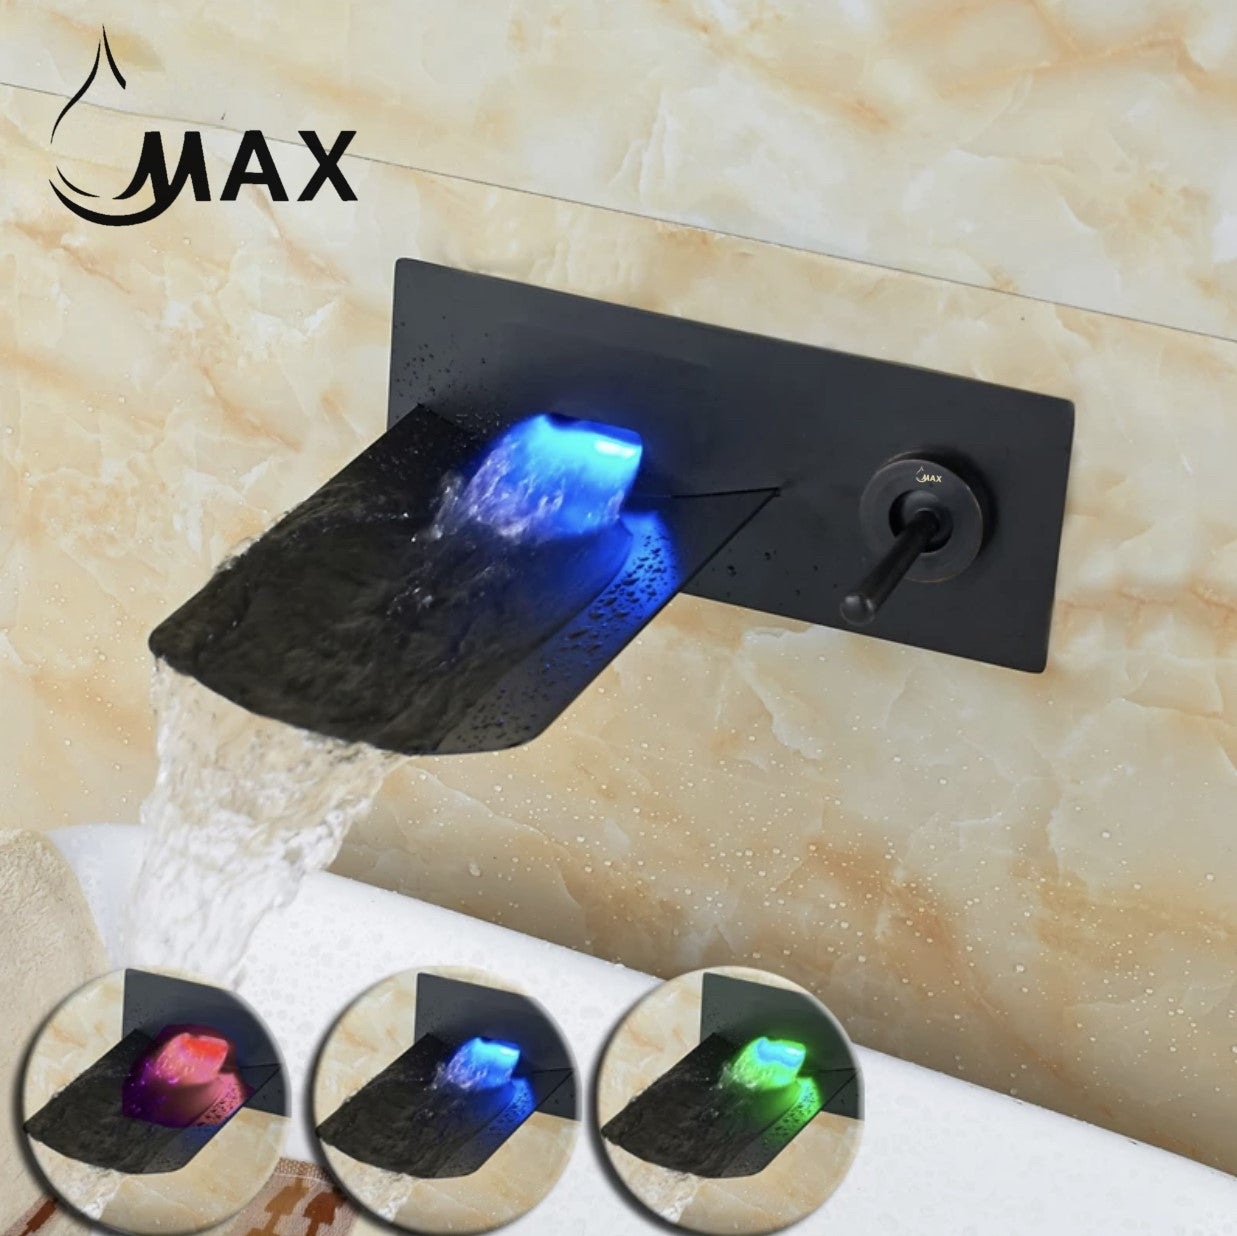 Wall Mounted Bathroom Faucet Waterfall With LED Light Matte Black Finish